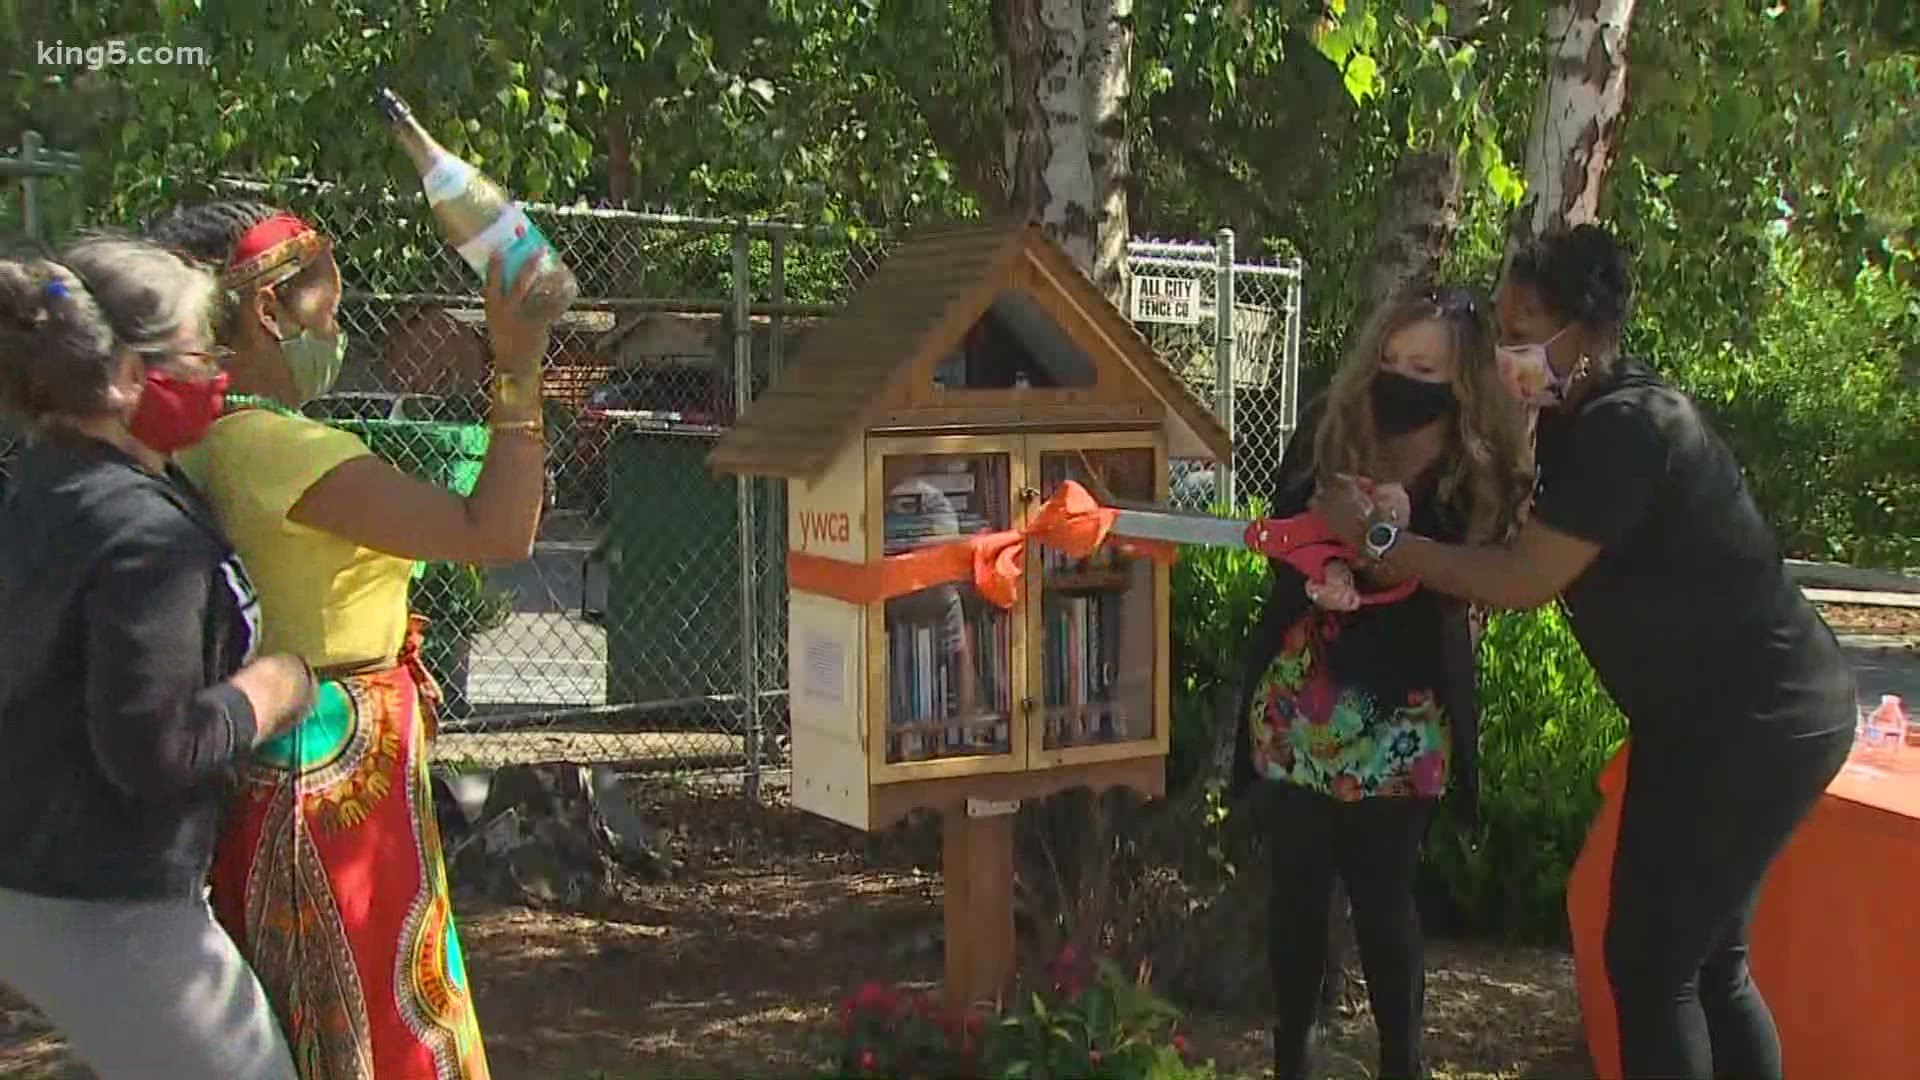 The YWCA hopes a Little Free Library that’s stocked with books by Black authors can help broaden people’s perspectives.